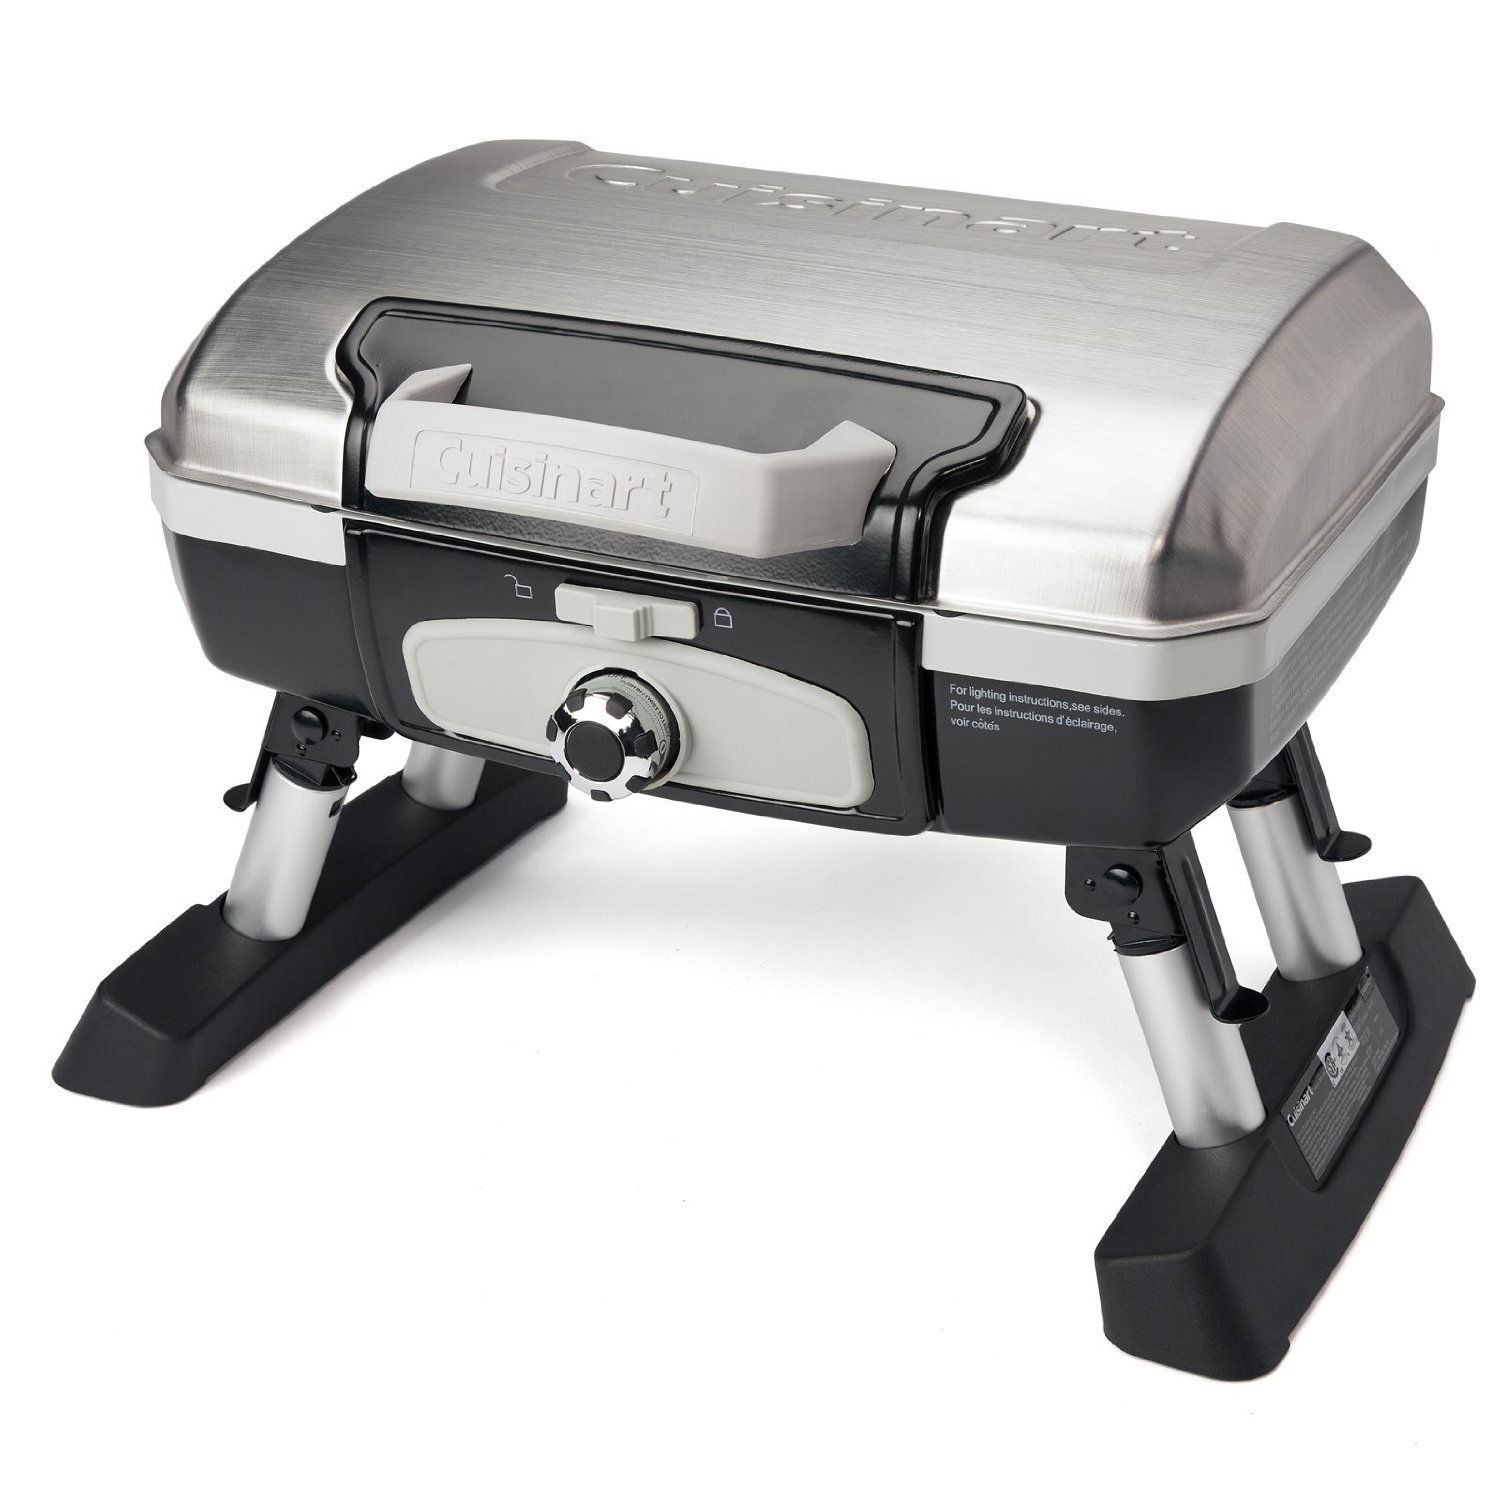 Cuisinart Petit Gourmet Portable Tabletop Outdoor LP Gas Grill, Silver/Black - image 1 of 3